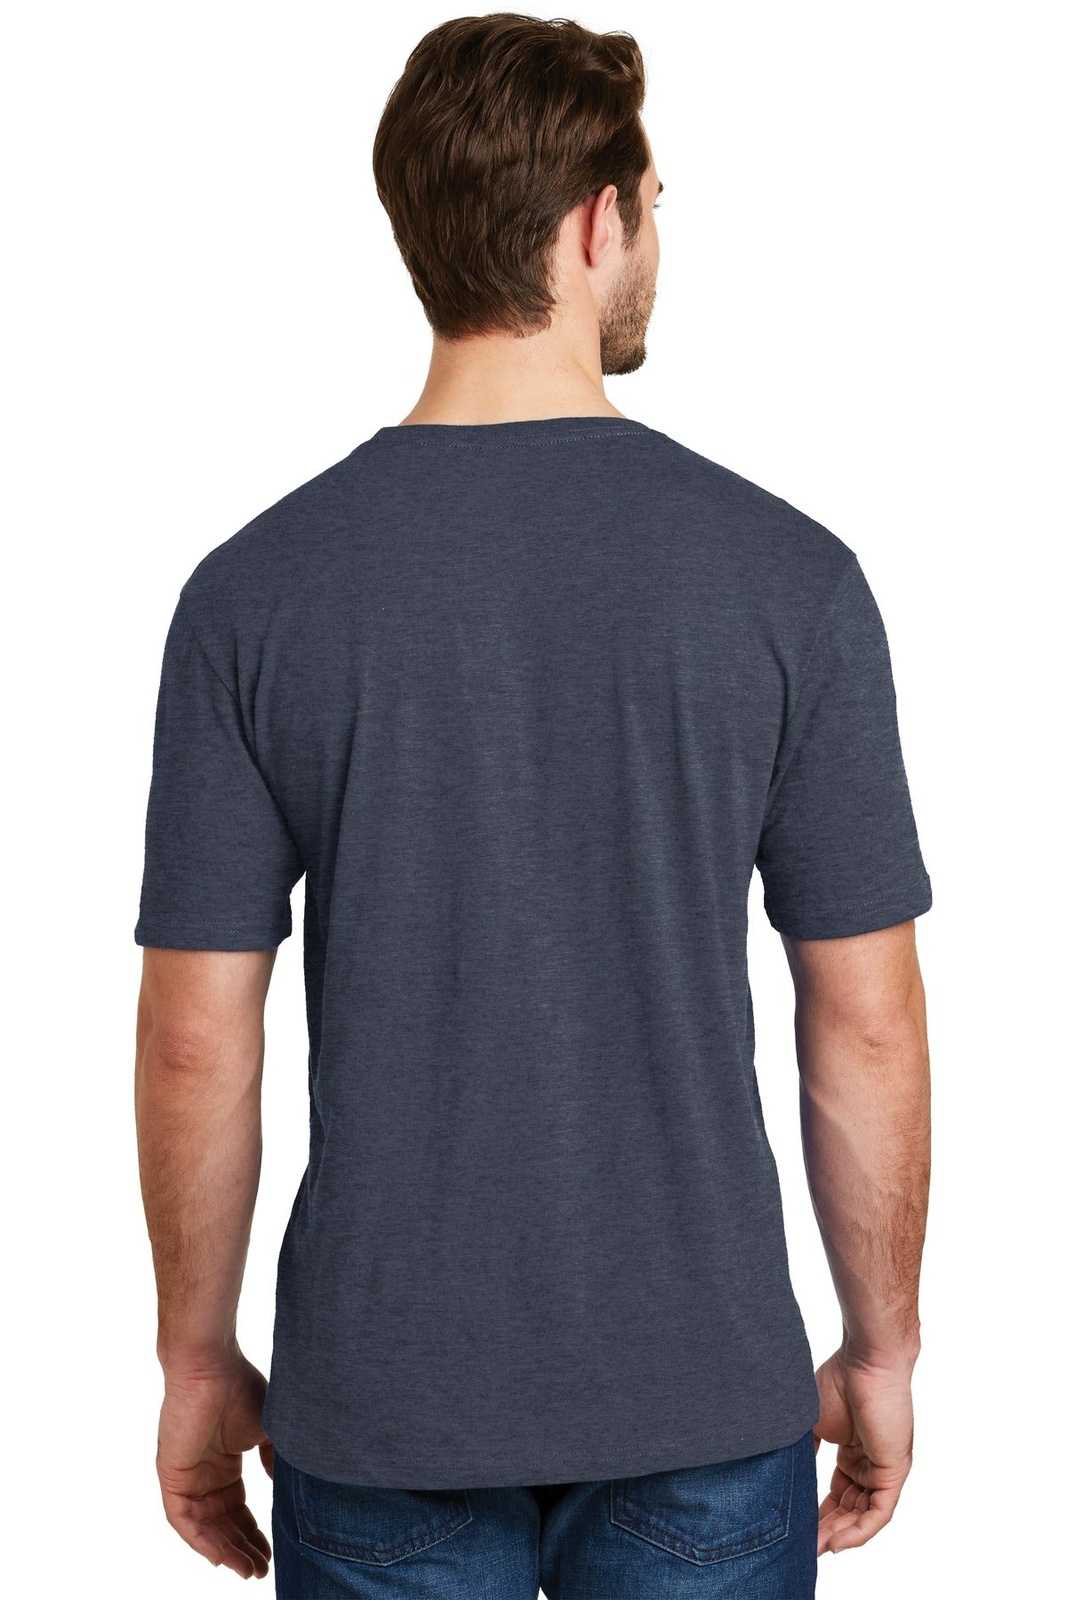 District DM108 Perfect Blend Tee - Heathered Navy - HIT a Double - 2